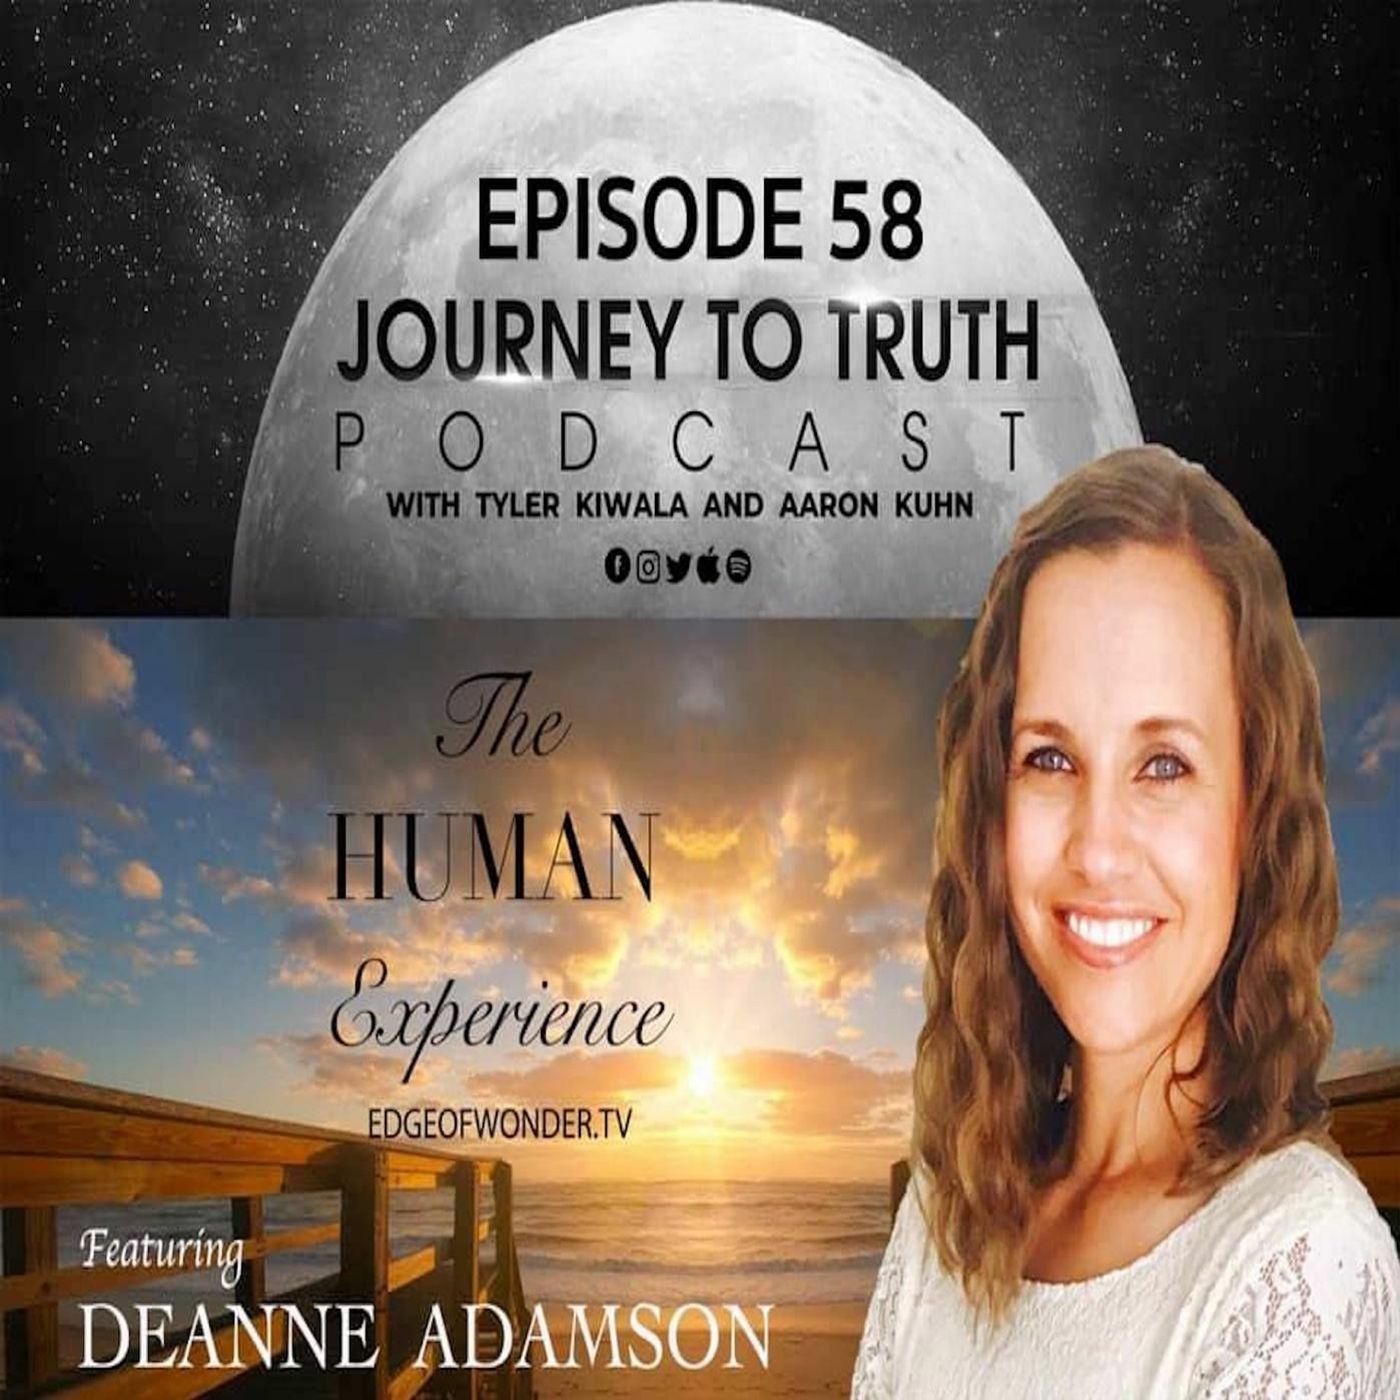 Ep. 58 - Deanne Adamson - The Human Potential - Psychedelic Therapies - Discovering Your Mission